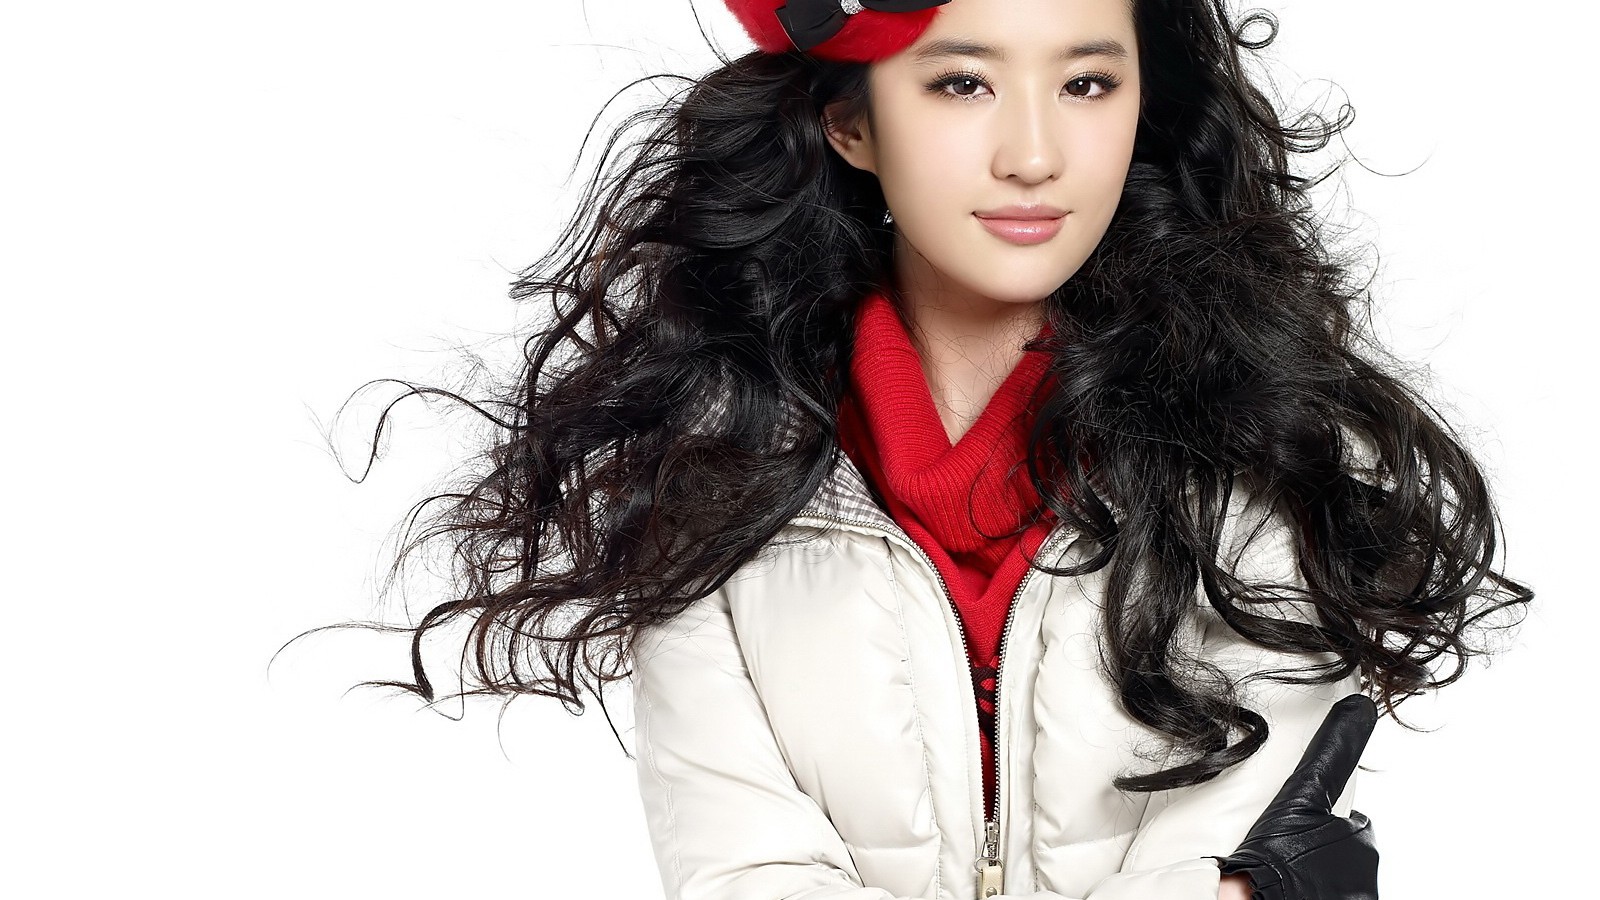 Liu Yifei in Casual Clothes and Cosmetics, No Matter Smiling or